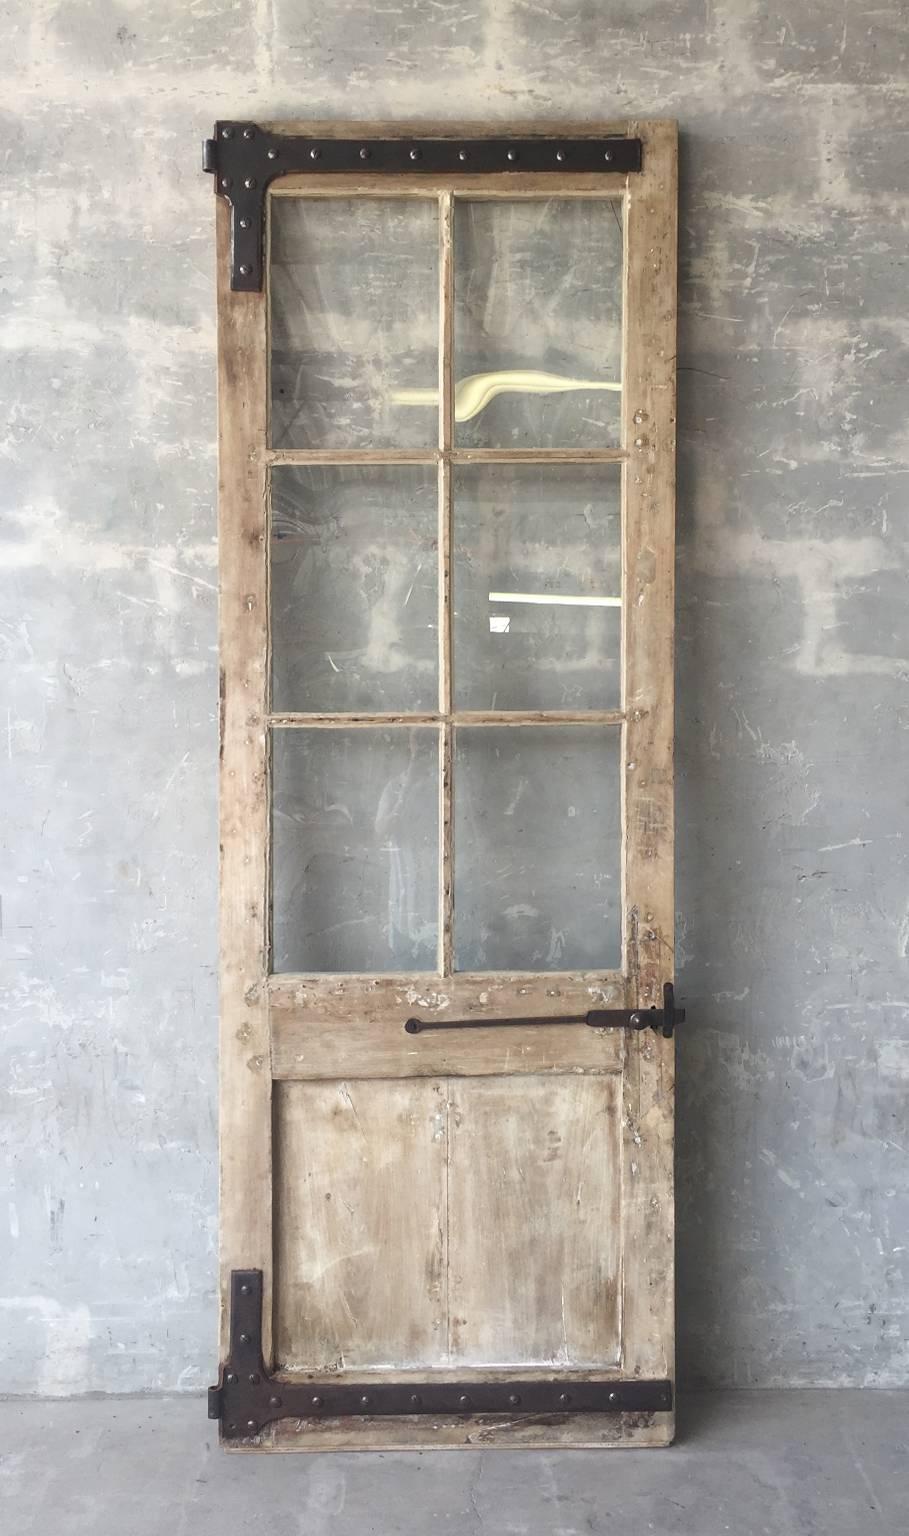 This is a single, fabulous antique 18th century walnut door from a storefront in the village of Lodere in the Languedoc region of France. This is a single tall door with six glass pieces. There is a carved crest on the bottom. Original reclaimed